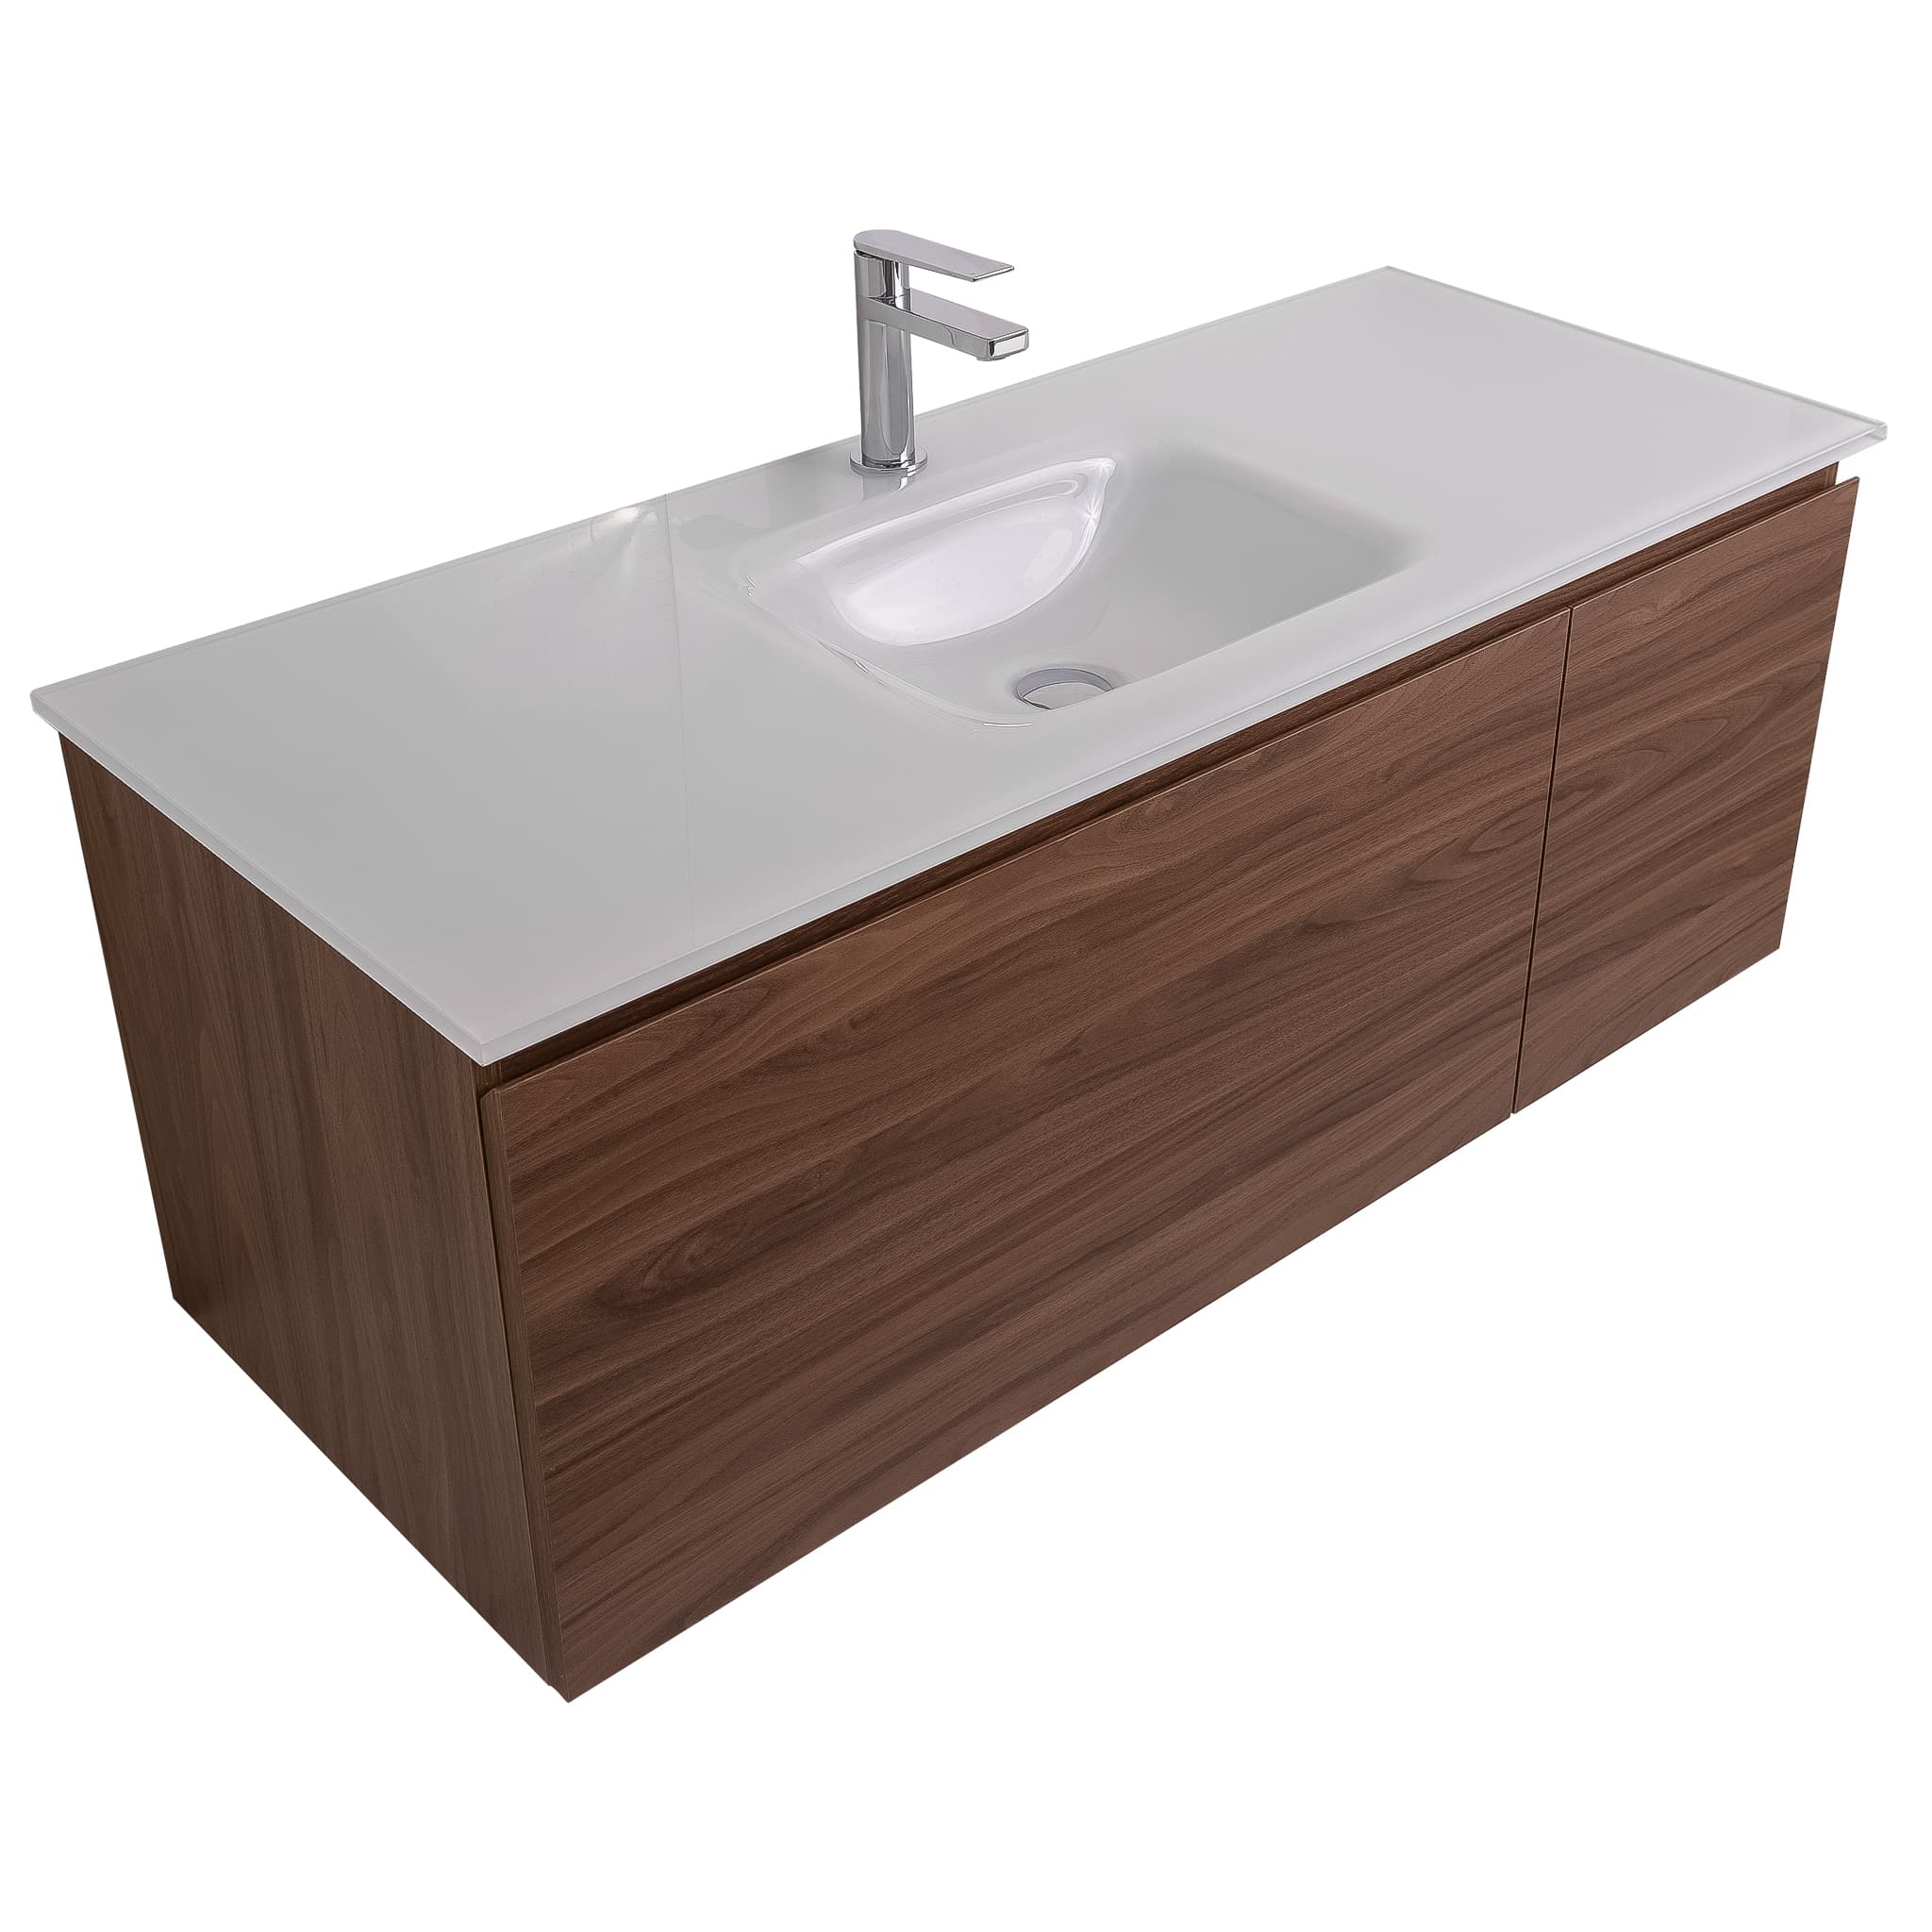 Venice 47.5 Walnut Wood Texture Cabinet, White Tempered Glass Sink, Wall Mounted Modern Vanity Set